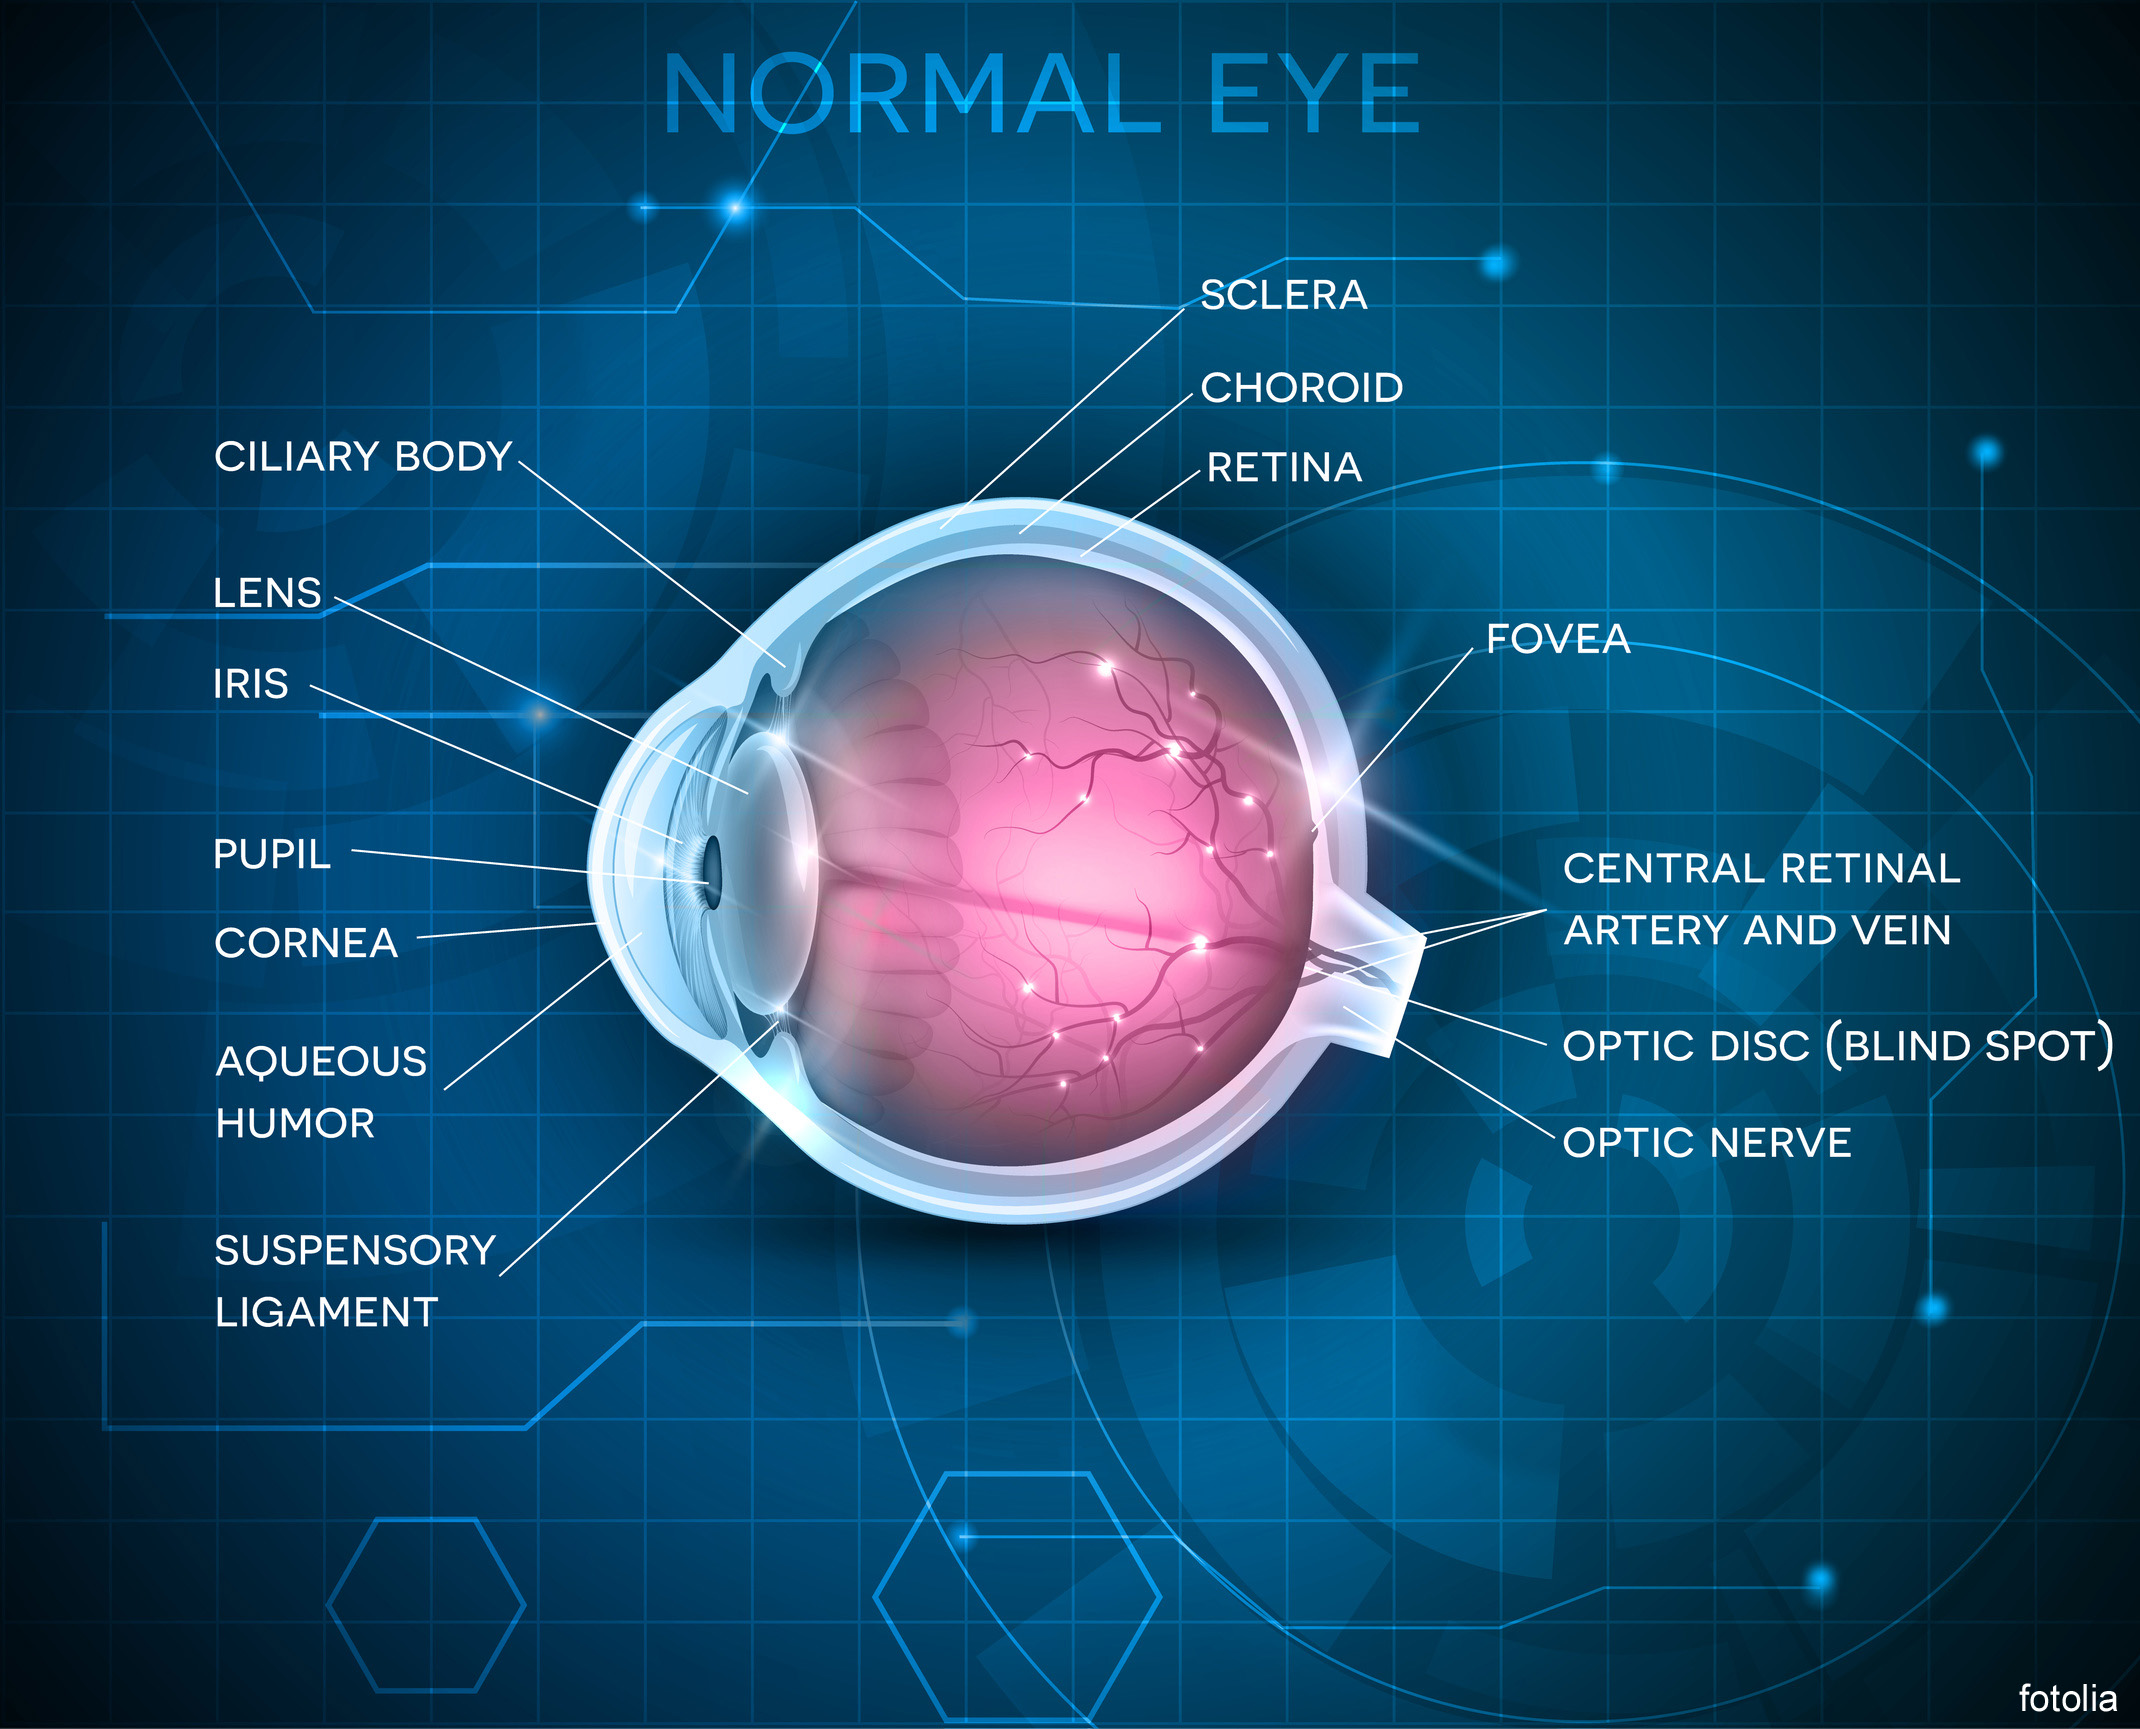 IMPLANT INFORMATION about Eye Implants – THE IMPLANT REGISTER